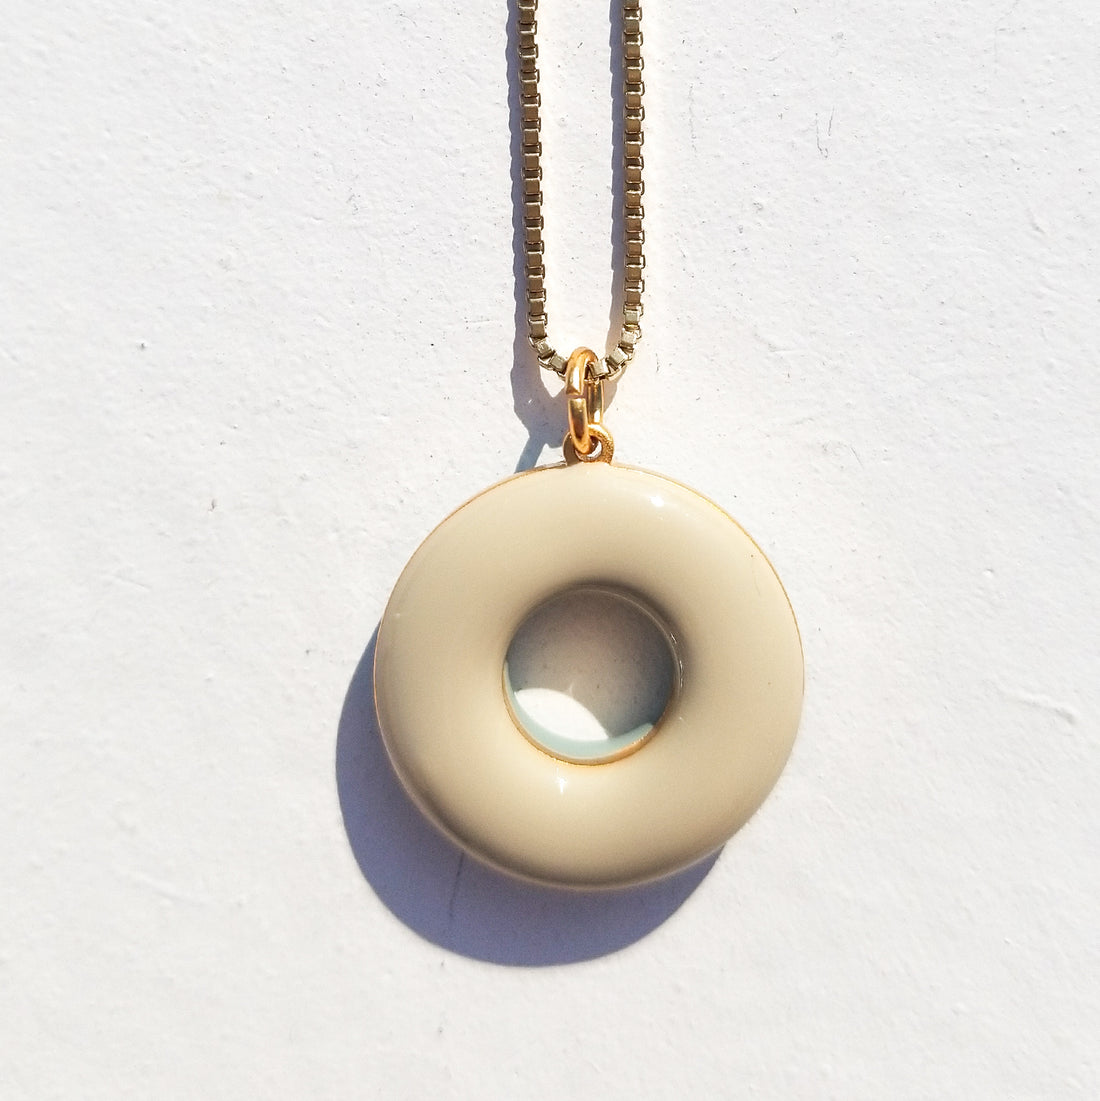 Donut Necklace • Pea Green & Stone